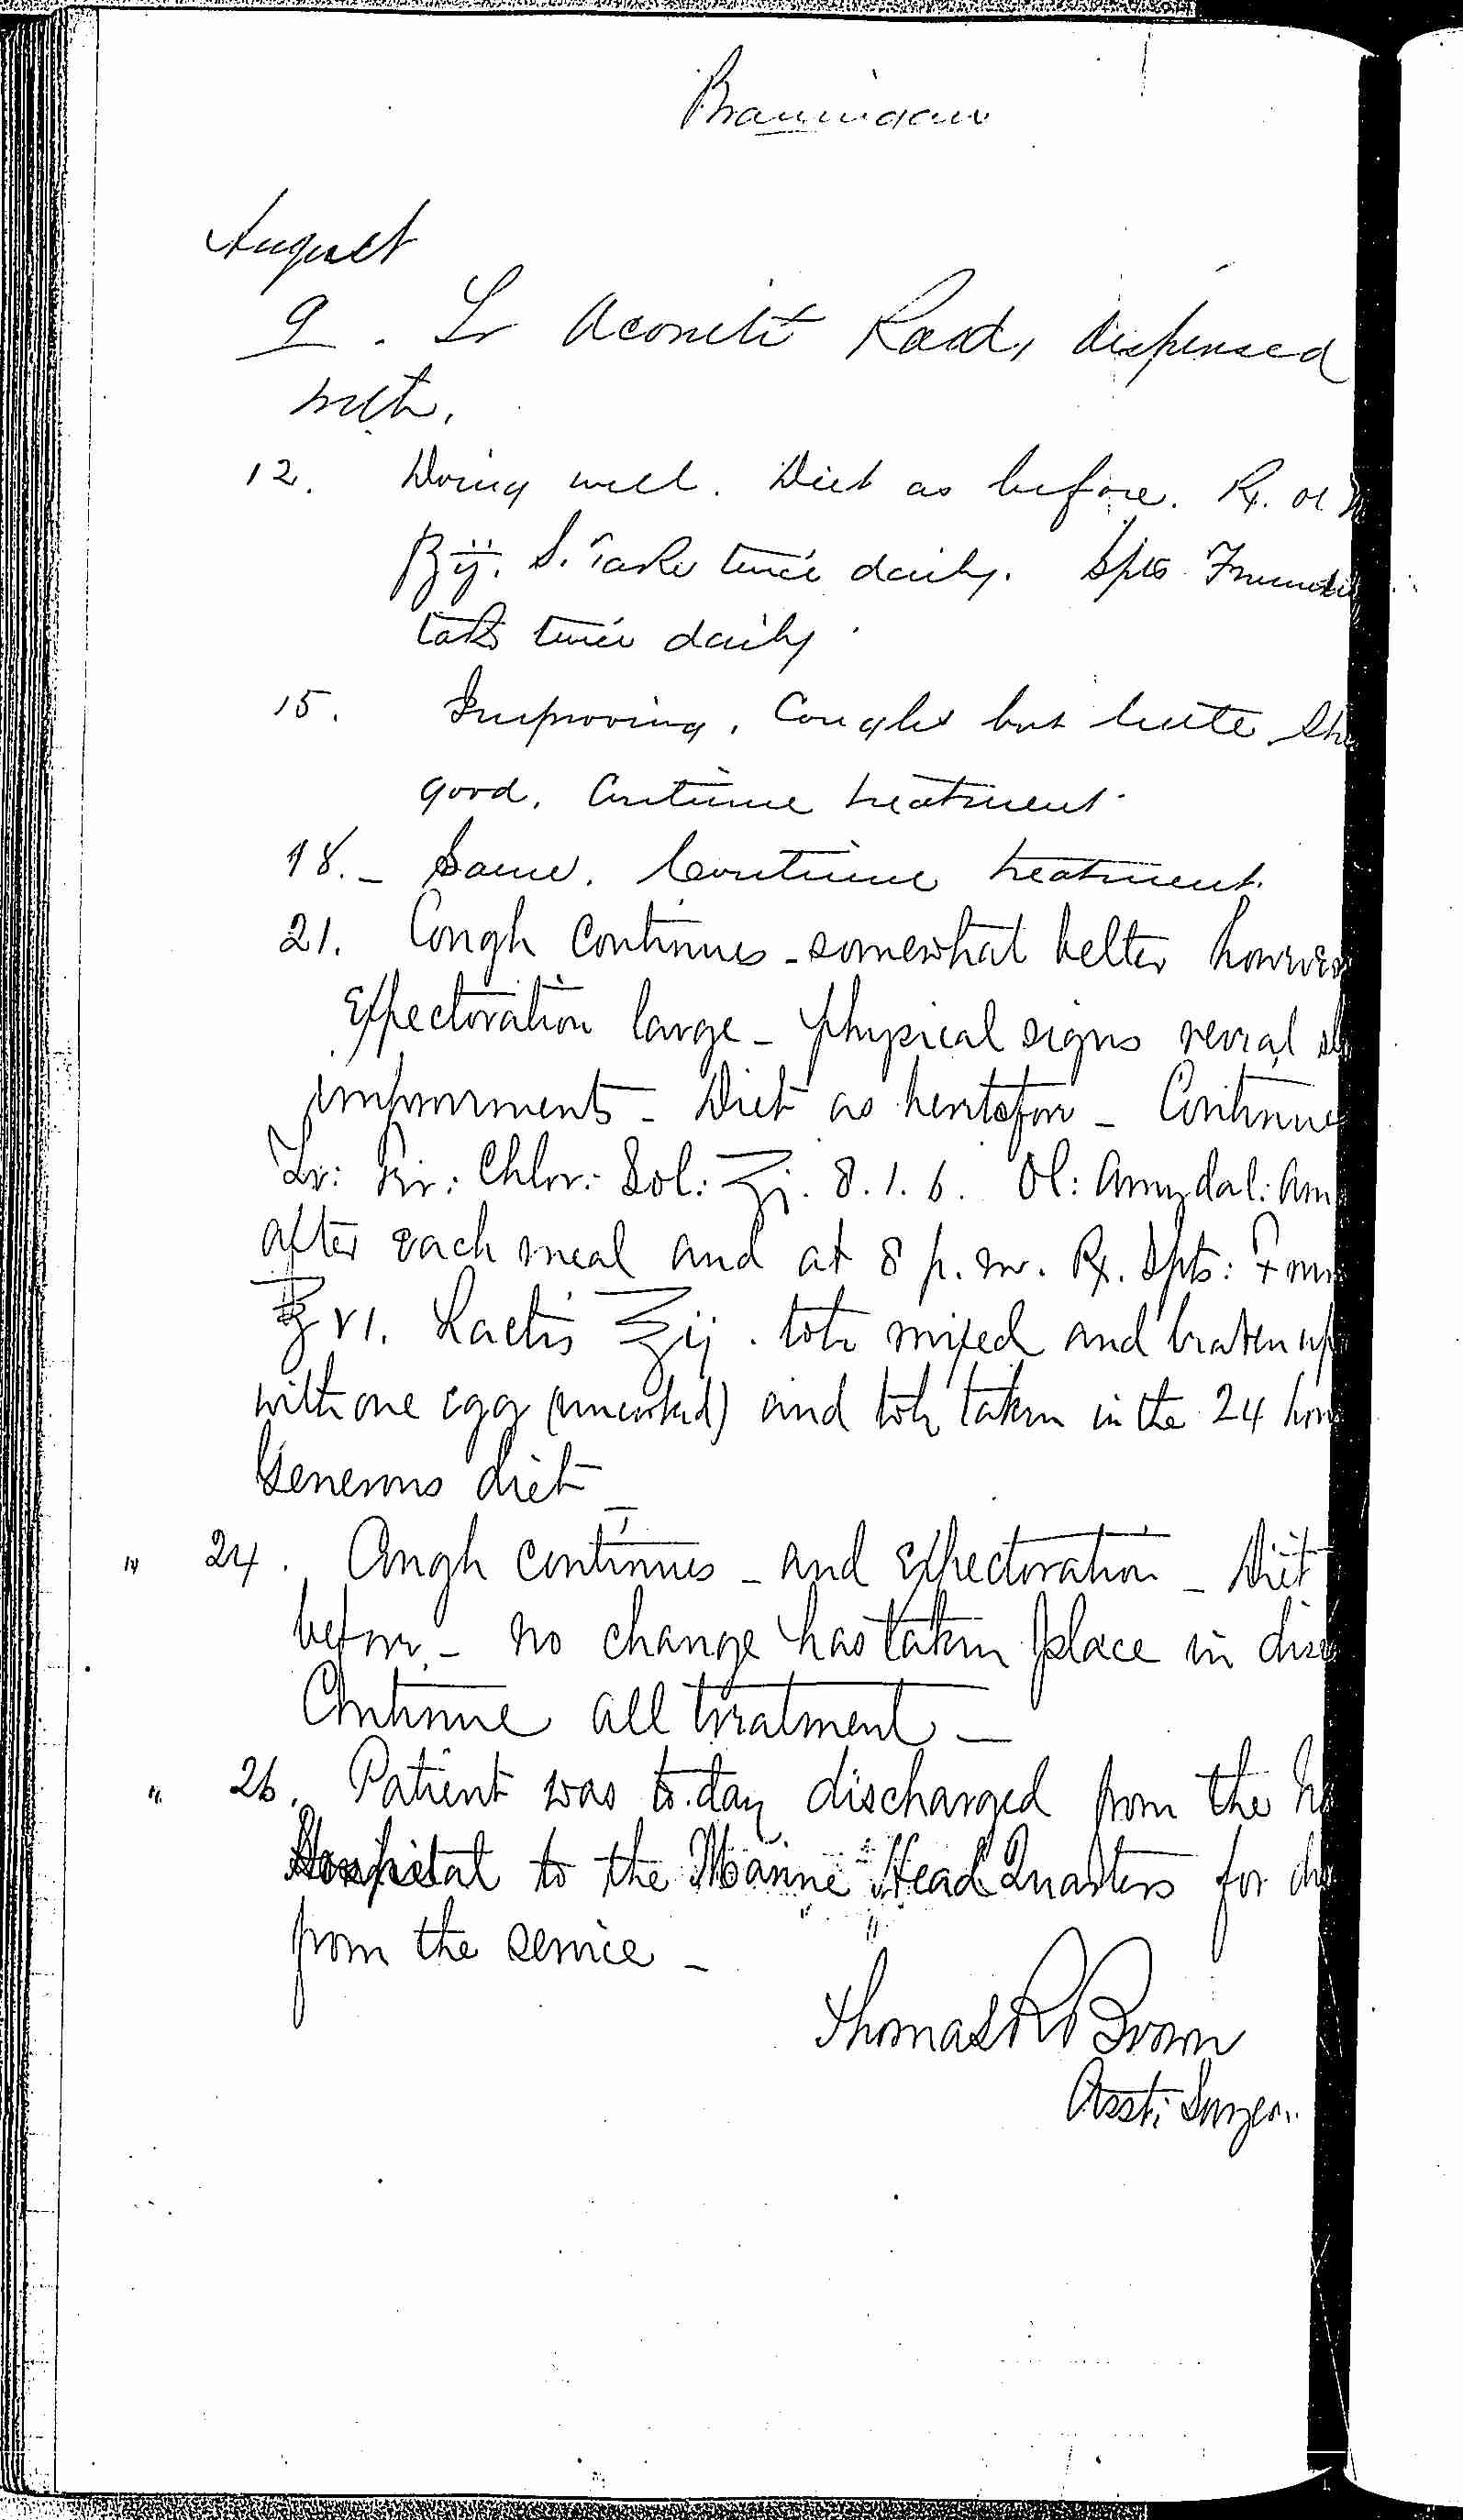 Entry for Francis Brannigan (page 6 of 6) in the log Hospital Tickets and Case Papers - Naval Hospital - Washington, D.C. - 1868-69